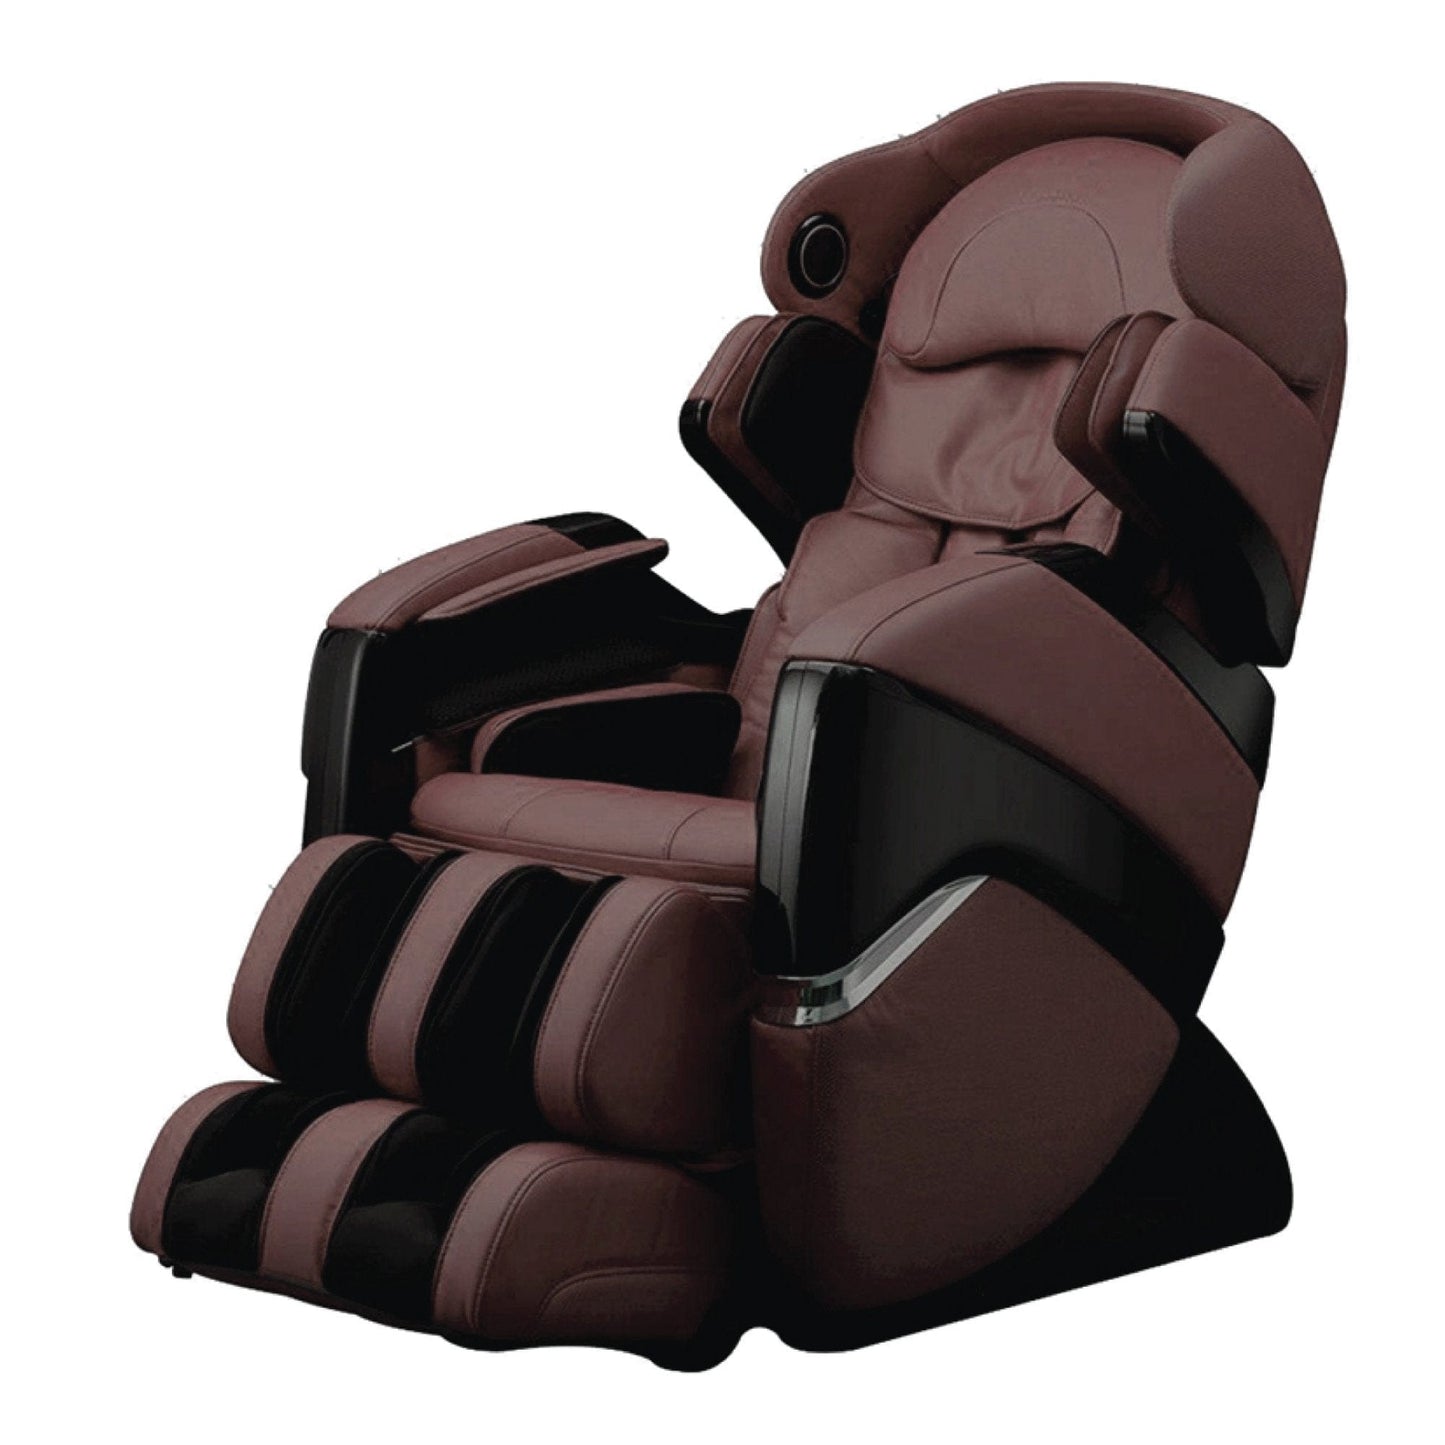 Osaki OS-3D Pro Cyber Brown / Curbside Delivery - Free / 1 Year(Parts/Labor) 2&3 Year(Parts Only) - Free titan-chair